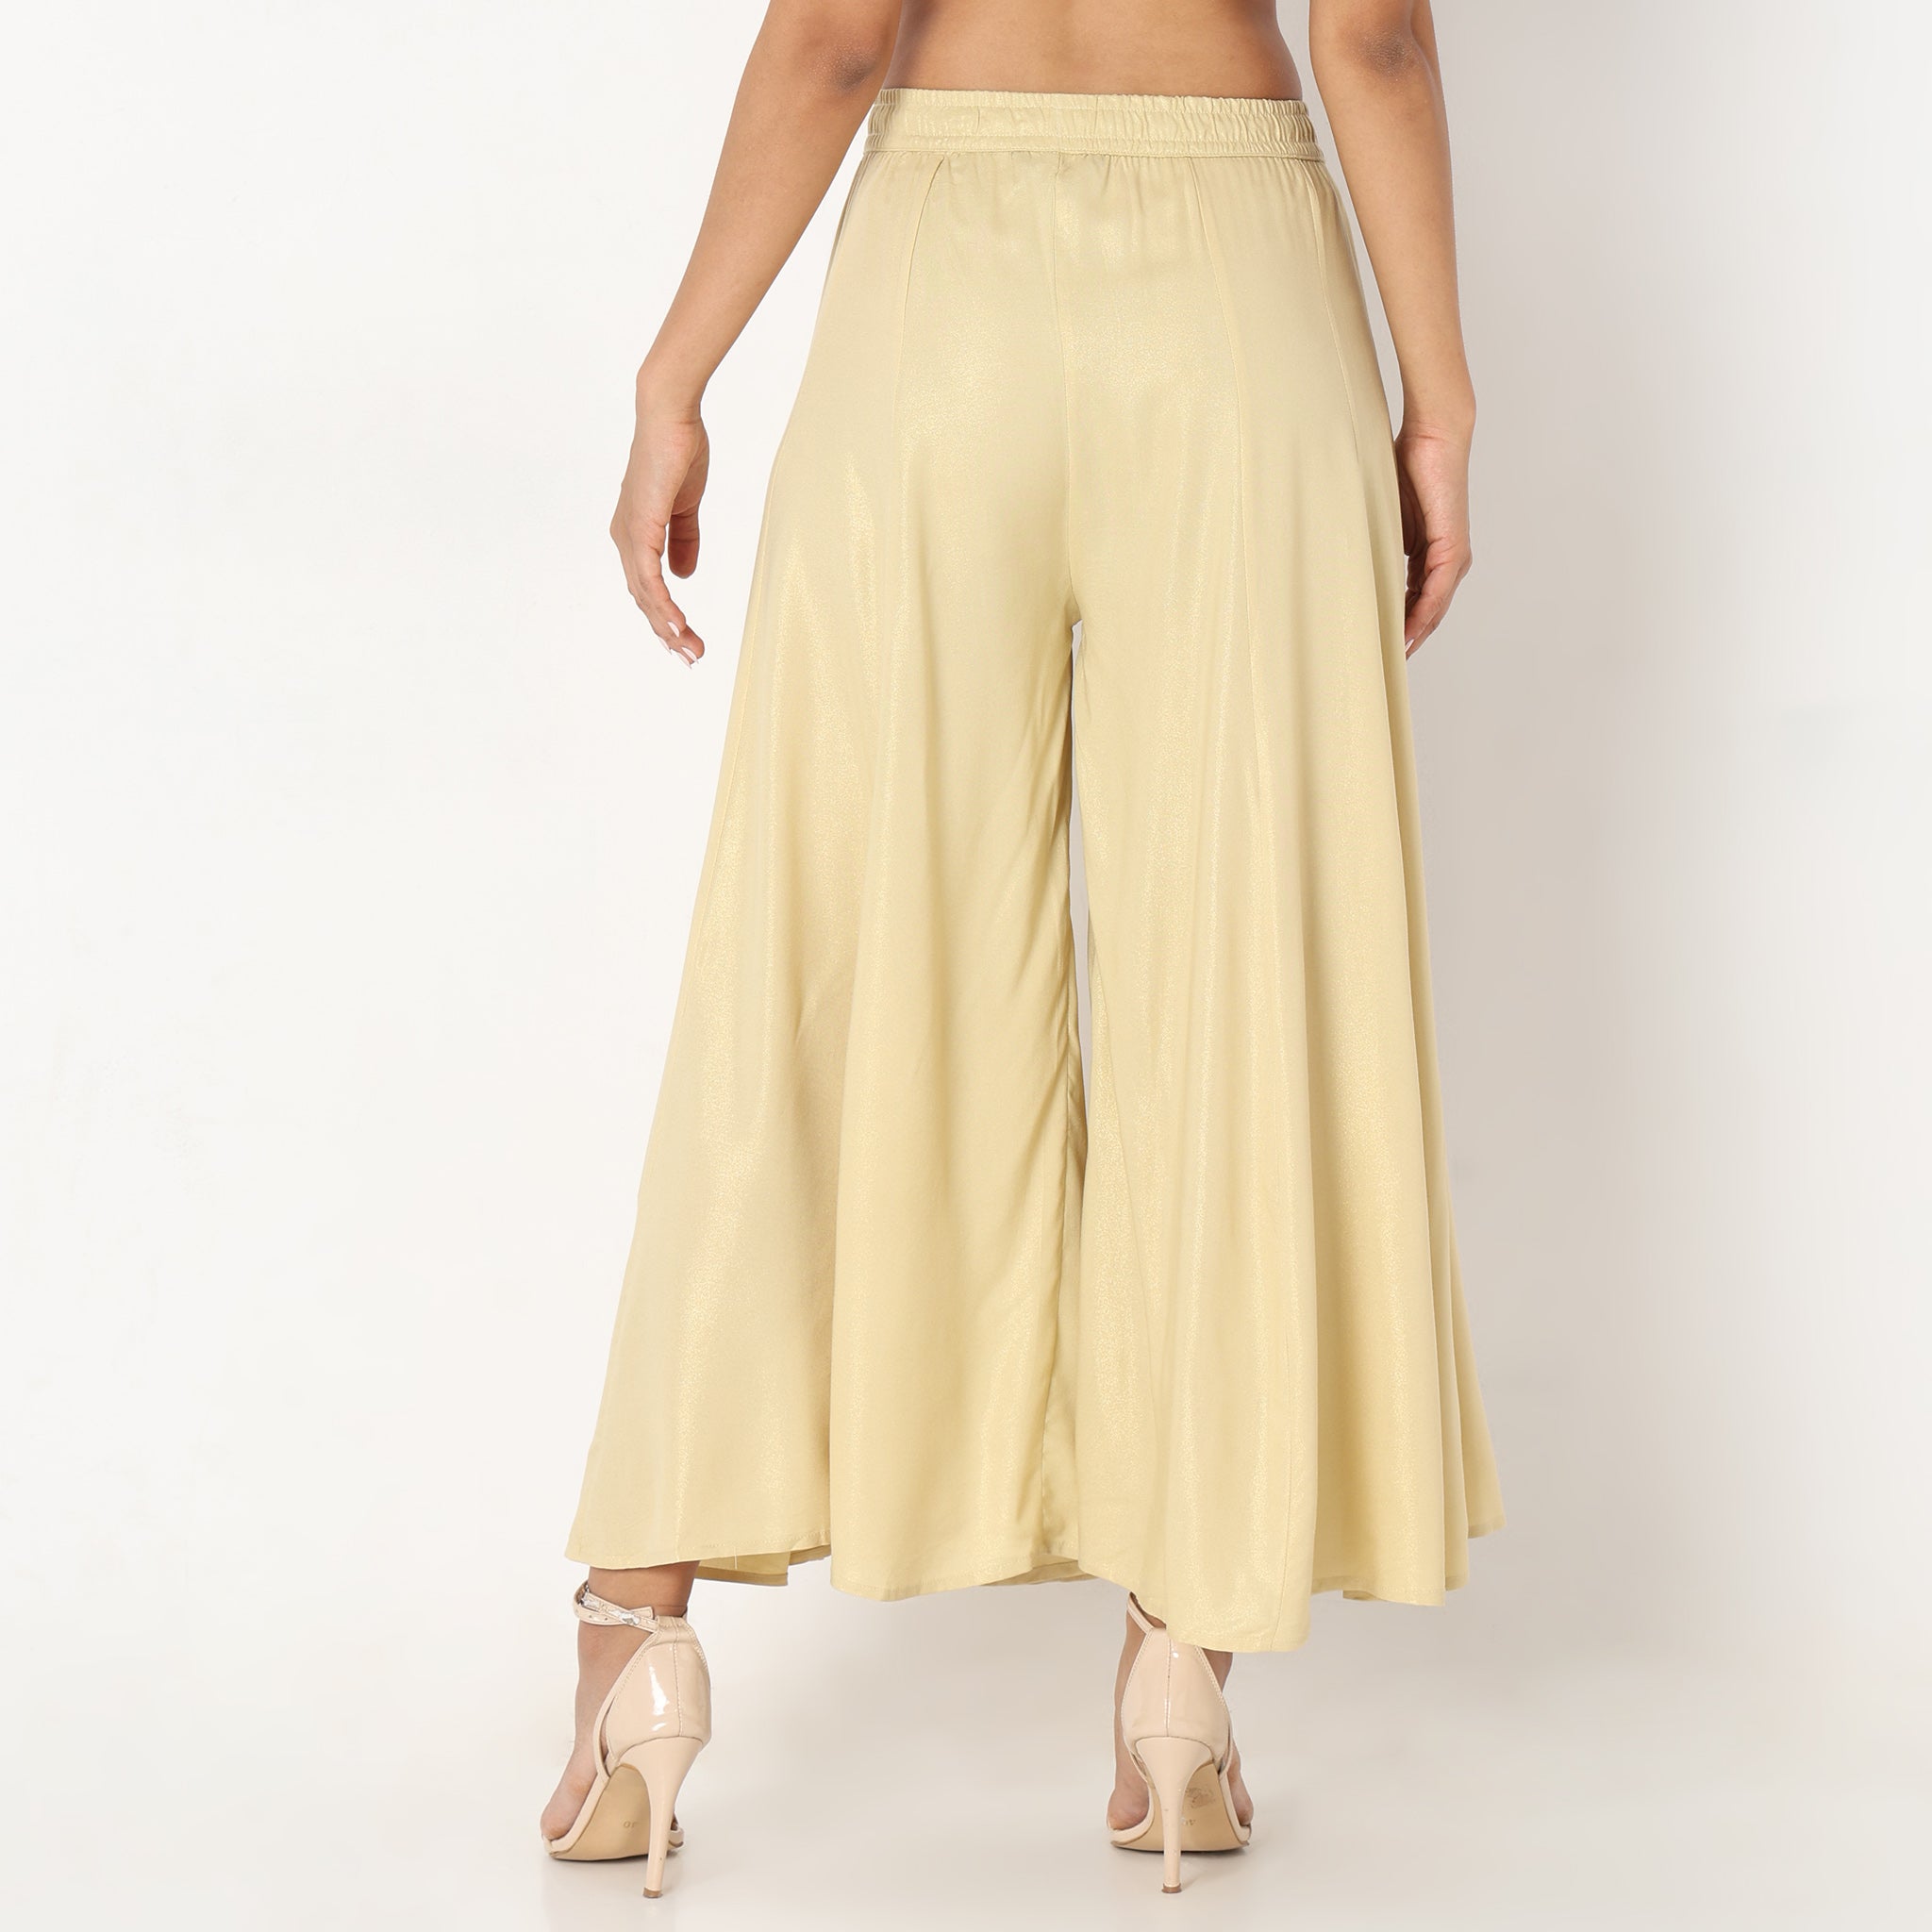 Golden Palazzo for Women in All Sizes - Forever Pretty Boutique